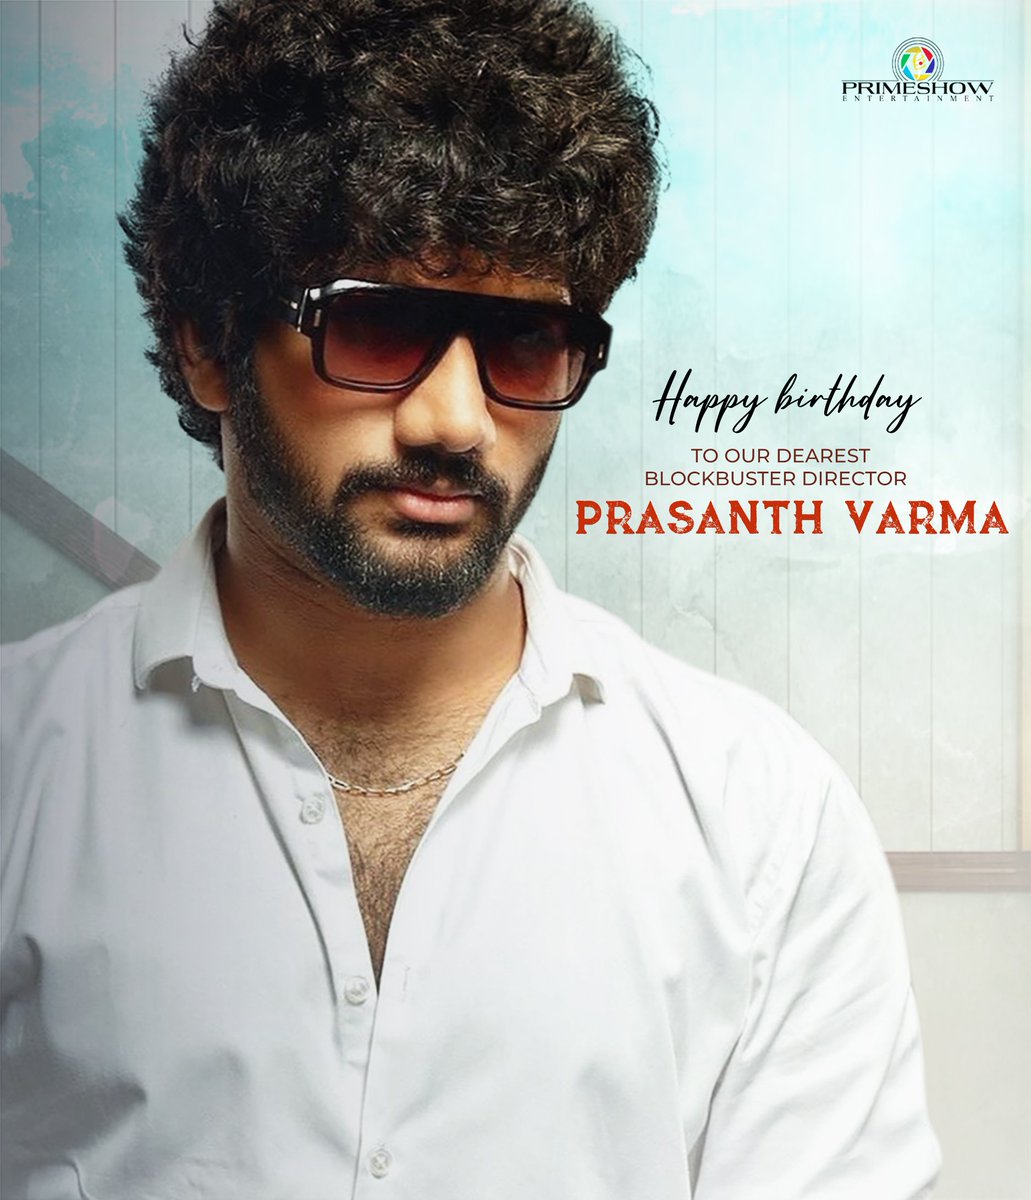 Wishing our dearest blockbuster director, the cinematic genius @PrasanthVarma garu a very happy birthday!!🎂 🎉 Your vision and commitment are clearly showcased on the big screens. Keep shining. ❤️ We wish you all the best for your future projects. 🤗 #HBDPrasanthVarma